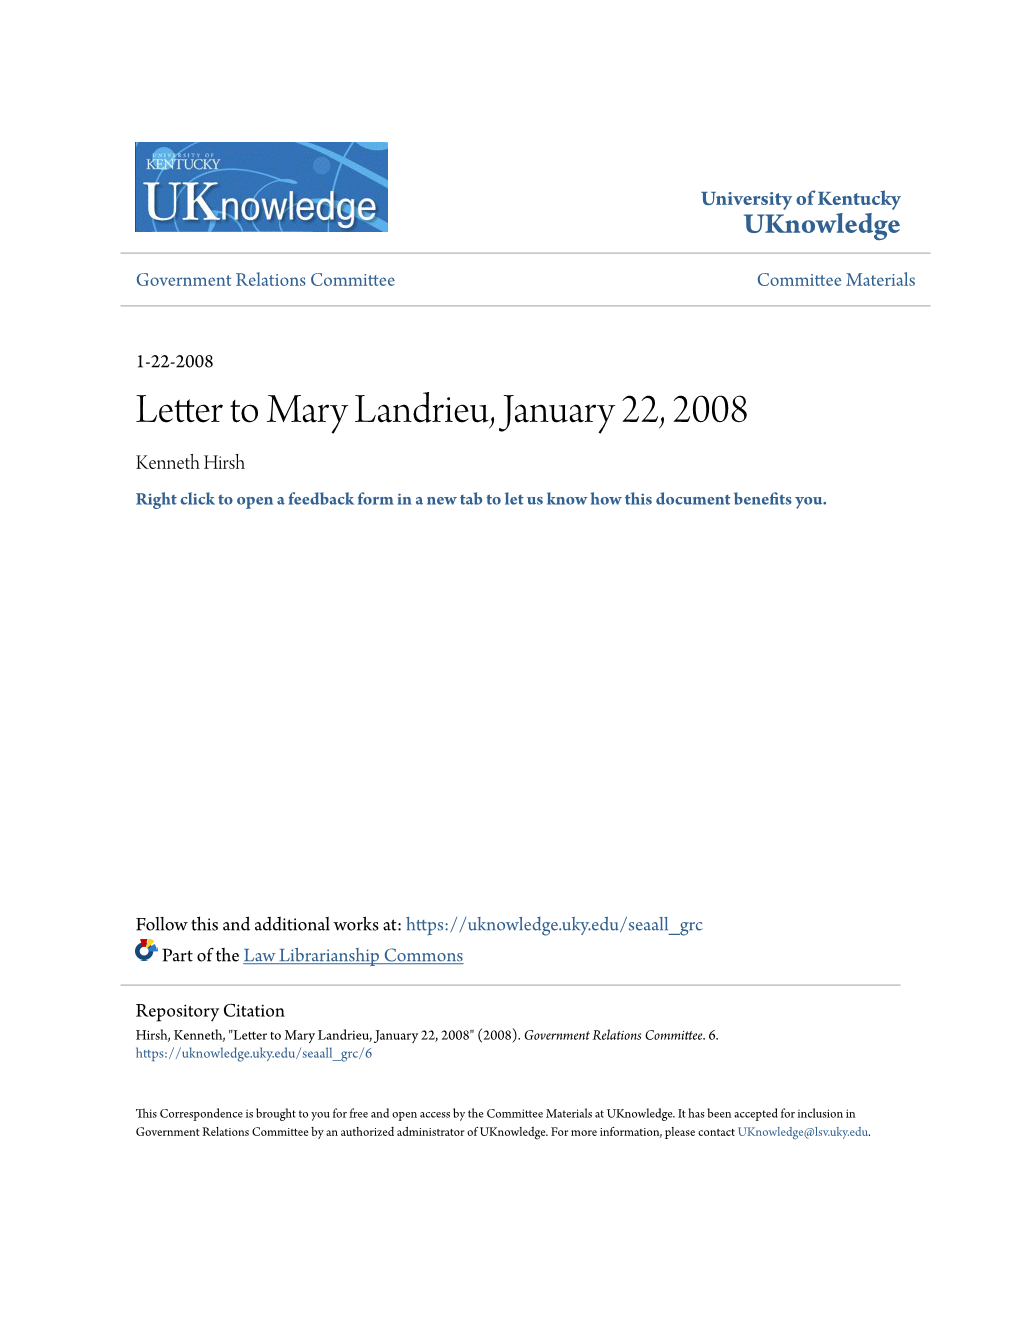 Letter to Mary Landrieu, January 22, 2008 Kenneth Hirsh Right Click to Open a Feedback Form in a New Tab to Let Us Know How This Document Benefits Oy U